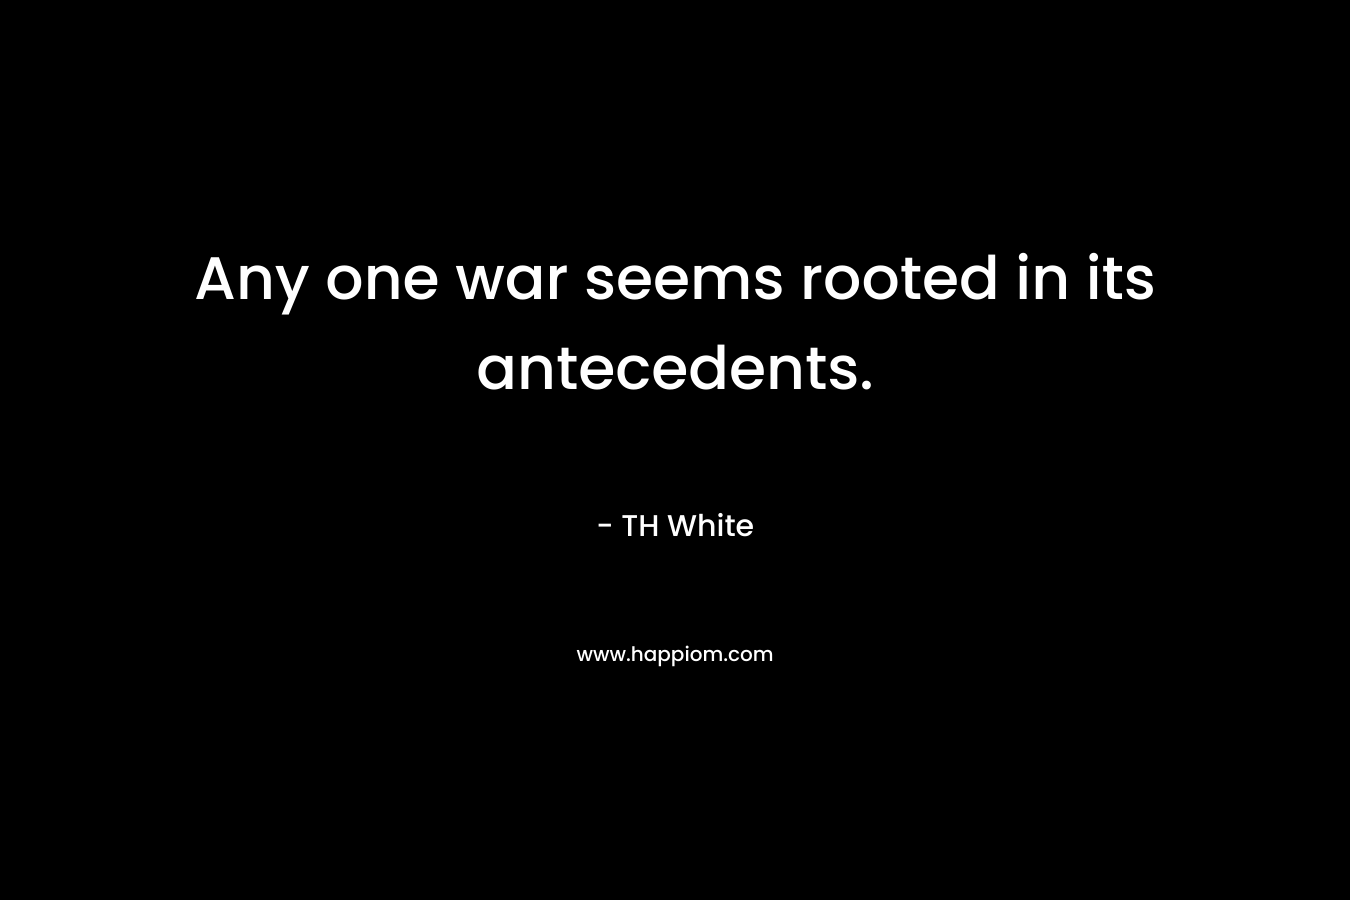 Any one war seems rooted in its antecedents. – TH White